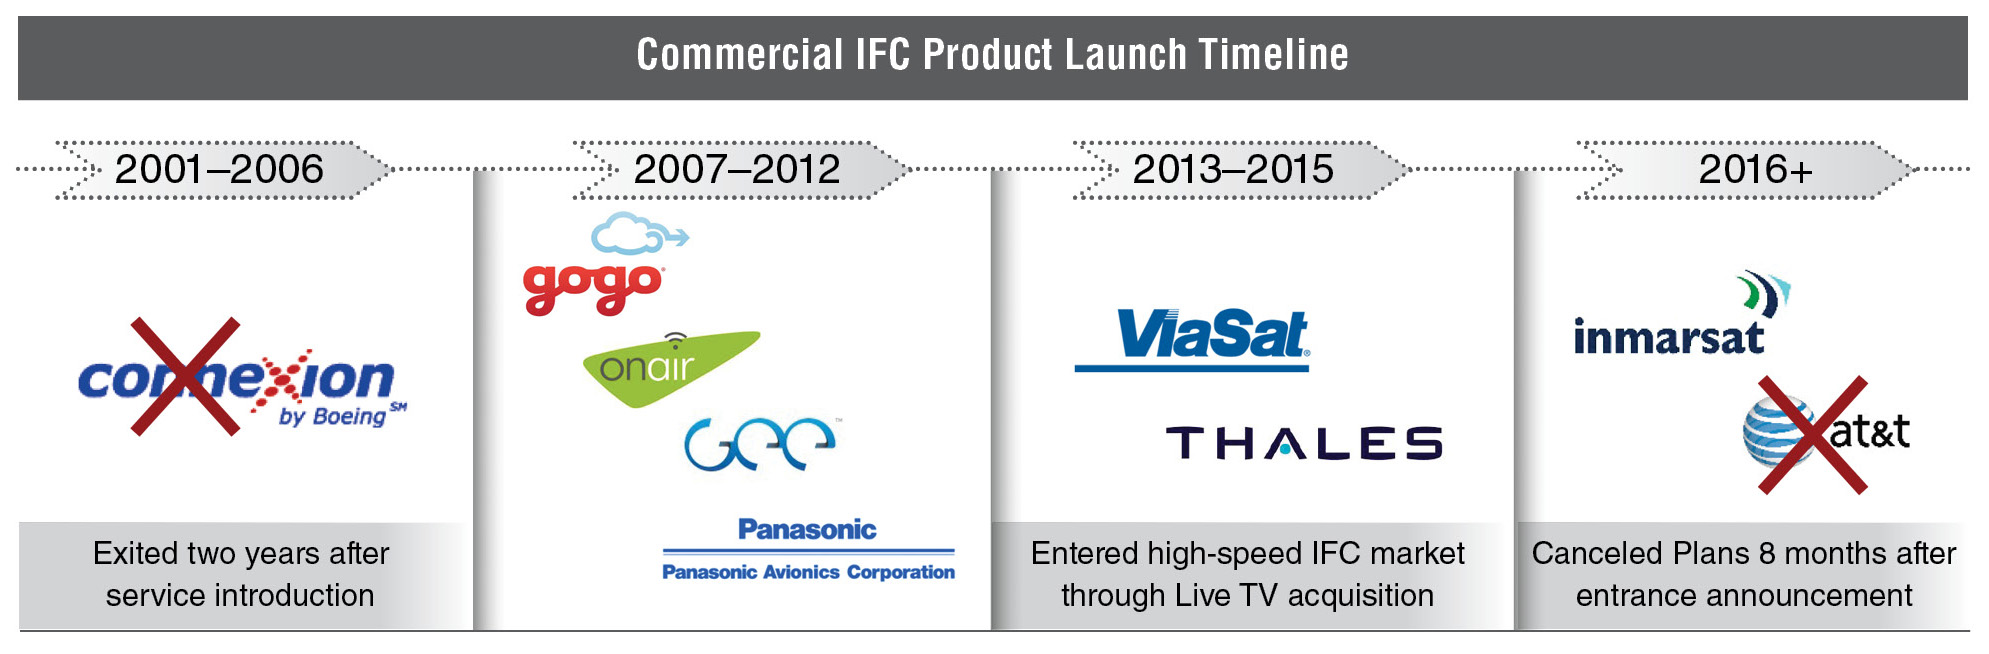 Commercial IFC Product Timeline .jpg